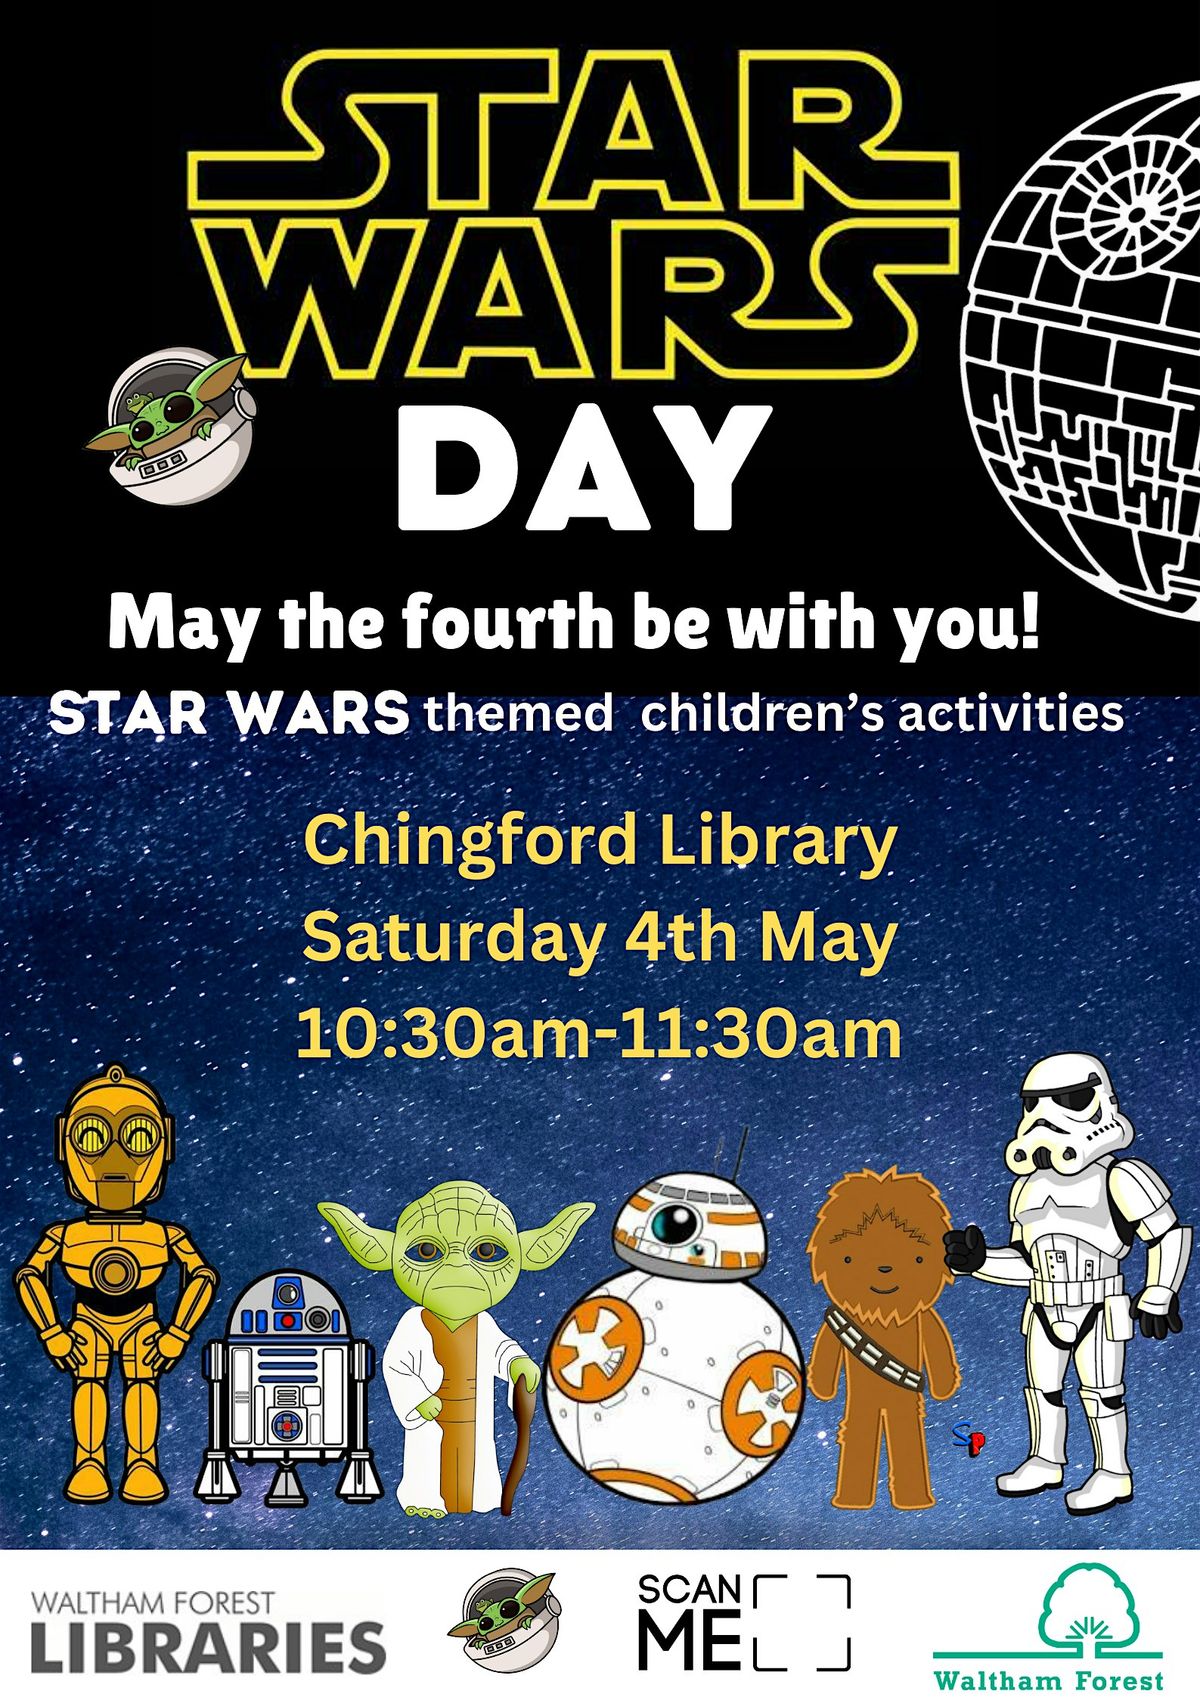 Star Wars Day @ Chingford Library